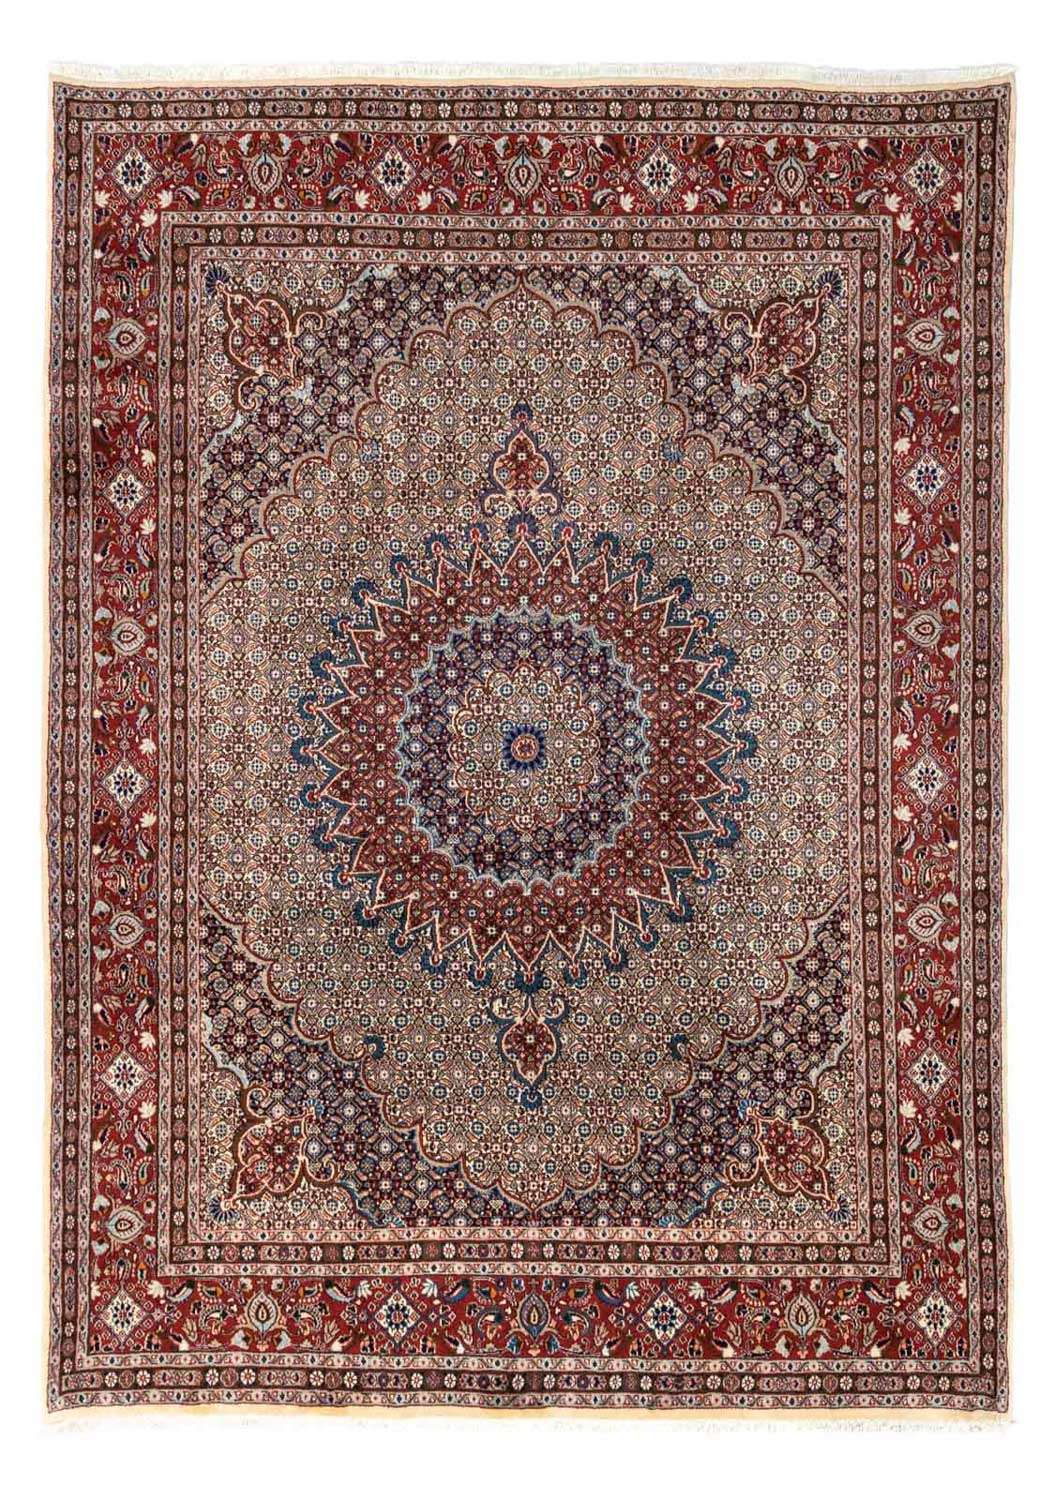 Perser Rug - Classic - 332 x 245 cm - red